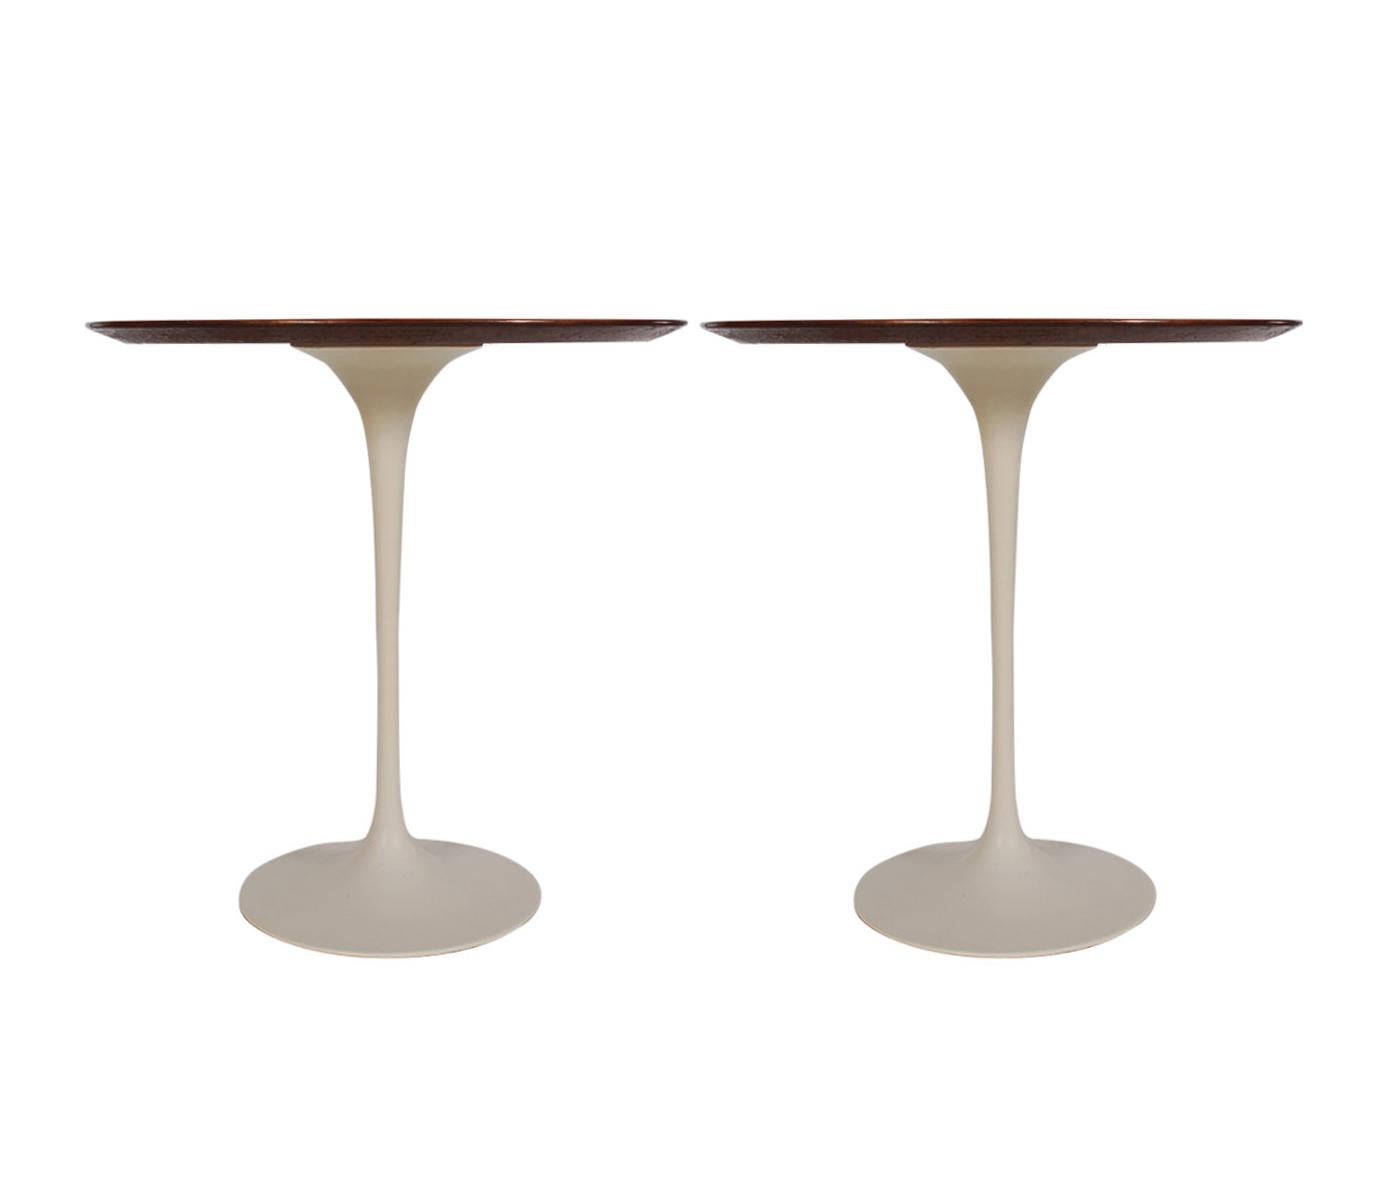 A matching pair of tulip tables designed by Eero Saarinen and produced by Knoll in 1971. These feature gorgeous walnut tops and white tulip bases. Manufacture labels.